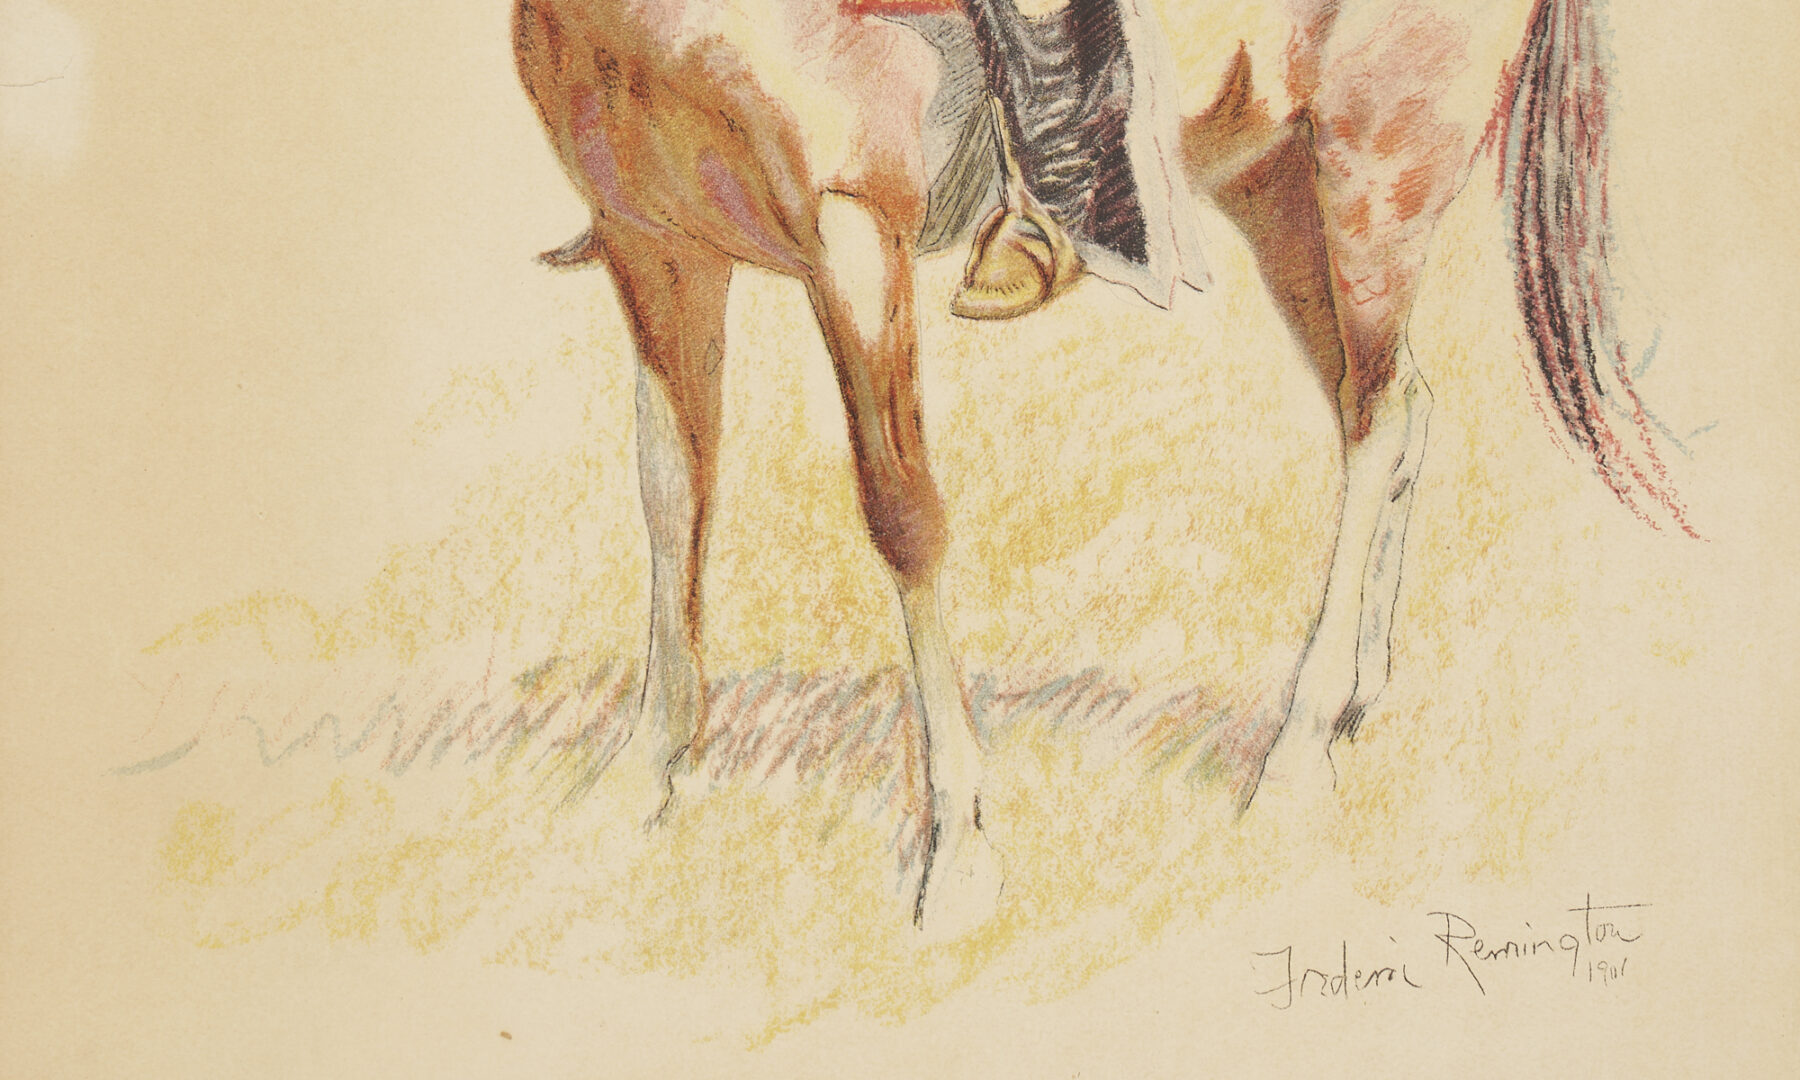 Lot 493: 2 Lithographs from Frederic Remington "A Bunch of Buckskins", 1901